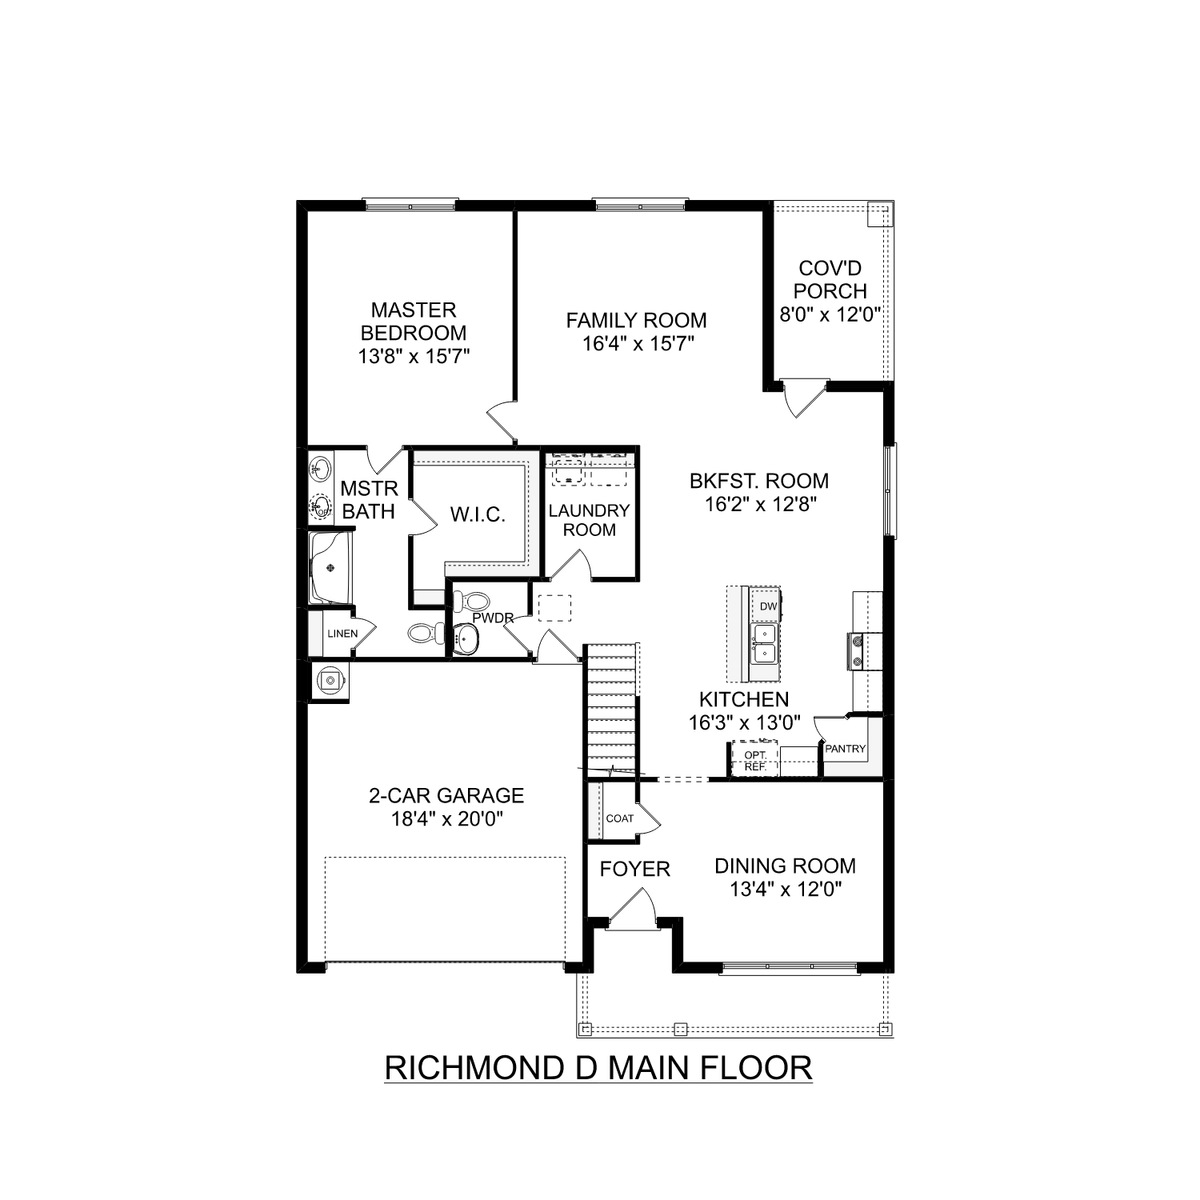 1 - The Richmond D buildable floor plan layout in Davidson Homes' Watts Glen community.